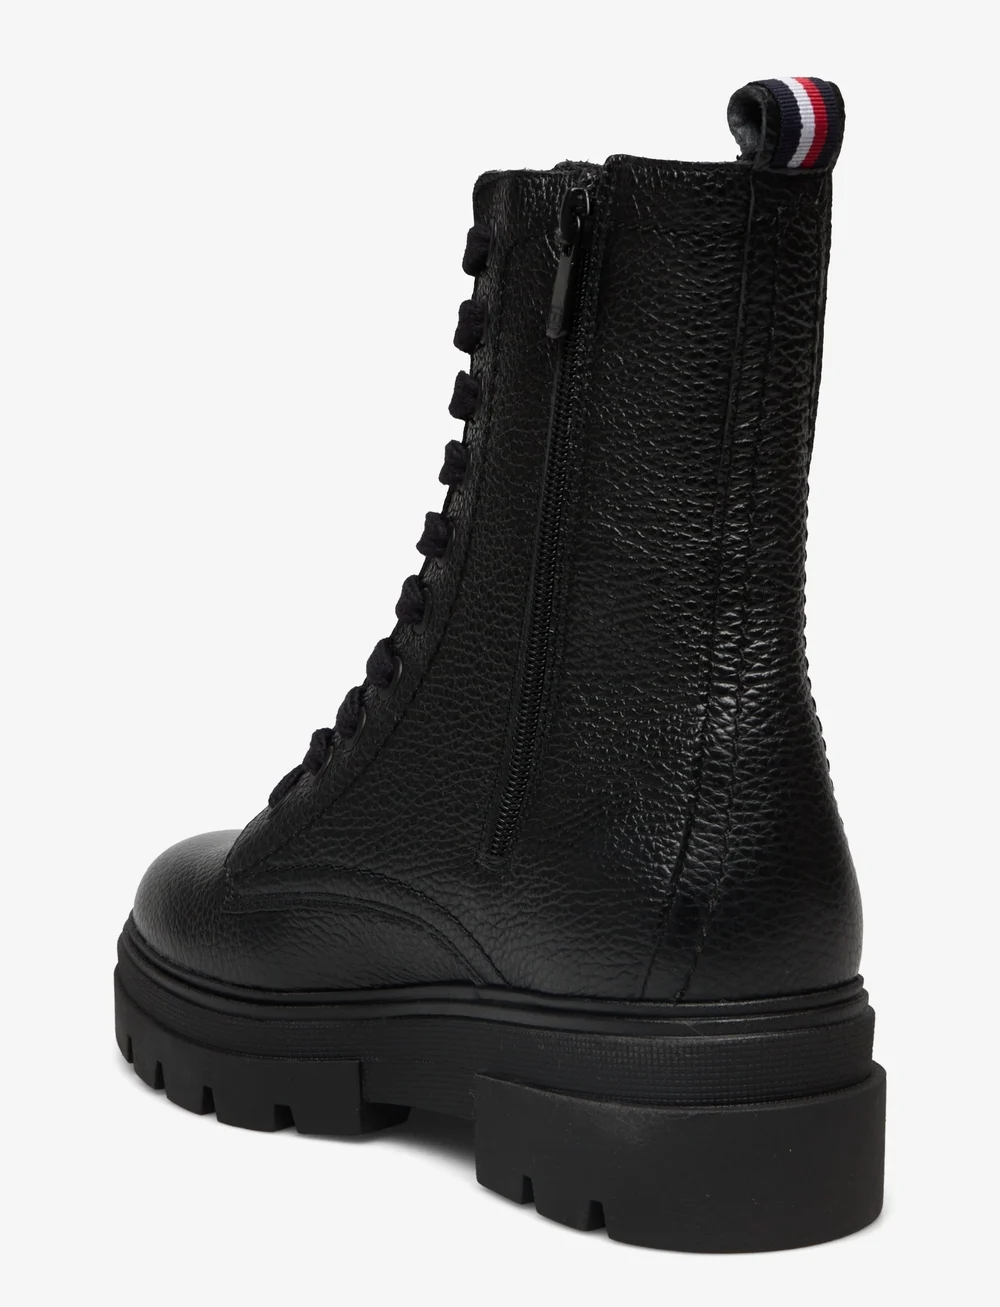 Tommy Hilfiger Monochromatic Lace Up Boot - Ankle boots